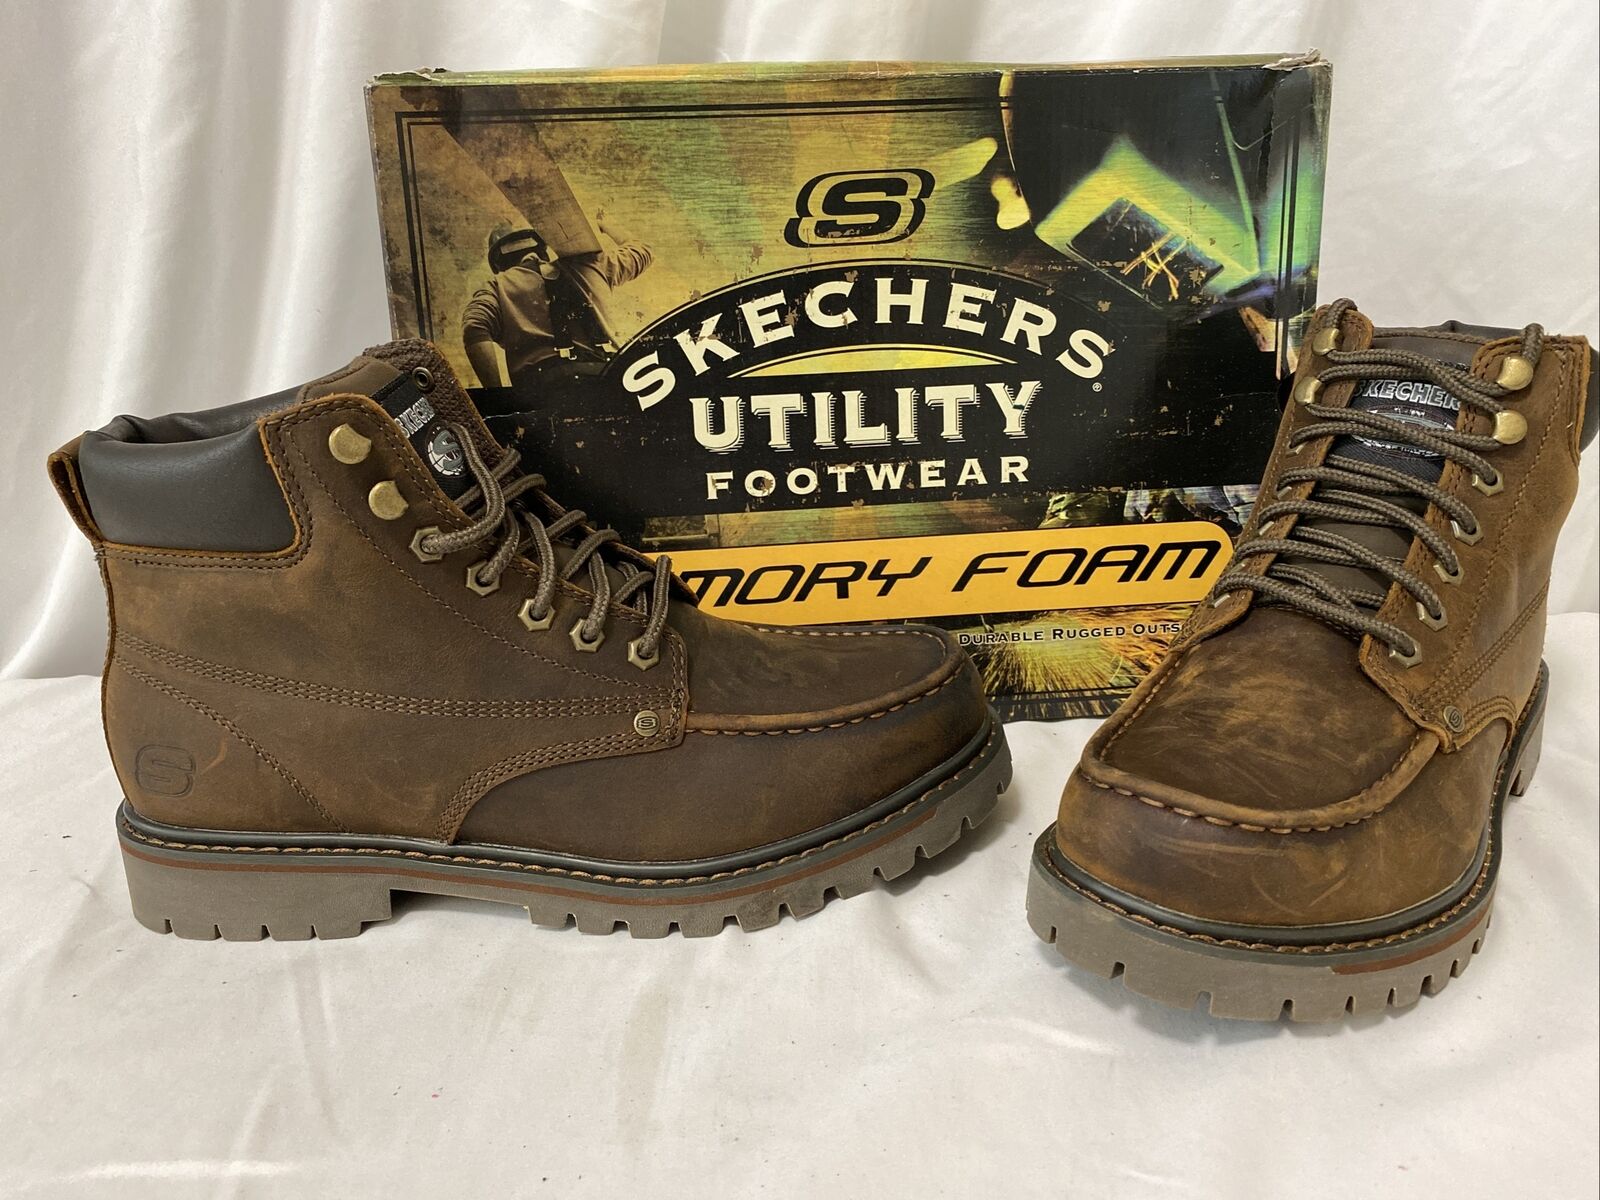 Skechers Utility Men’s Work/Hiking Boots Brown Leather Memory Size 9 UK 8 Eur 42